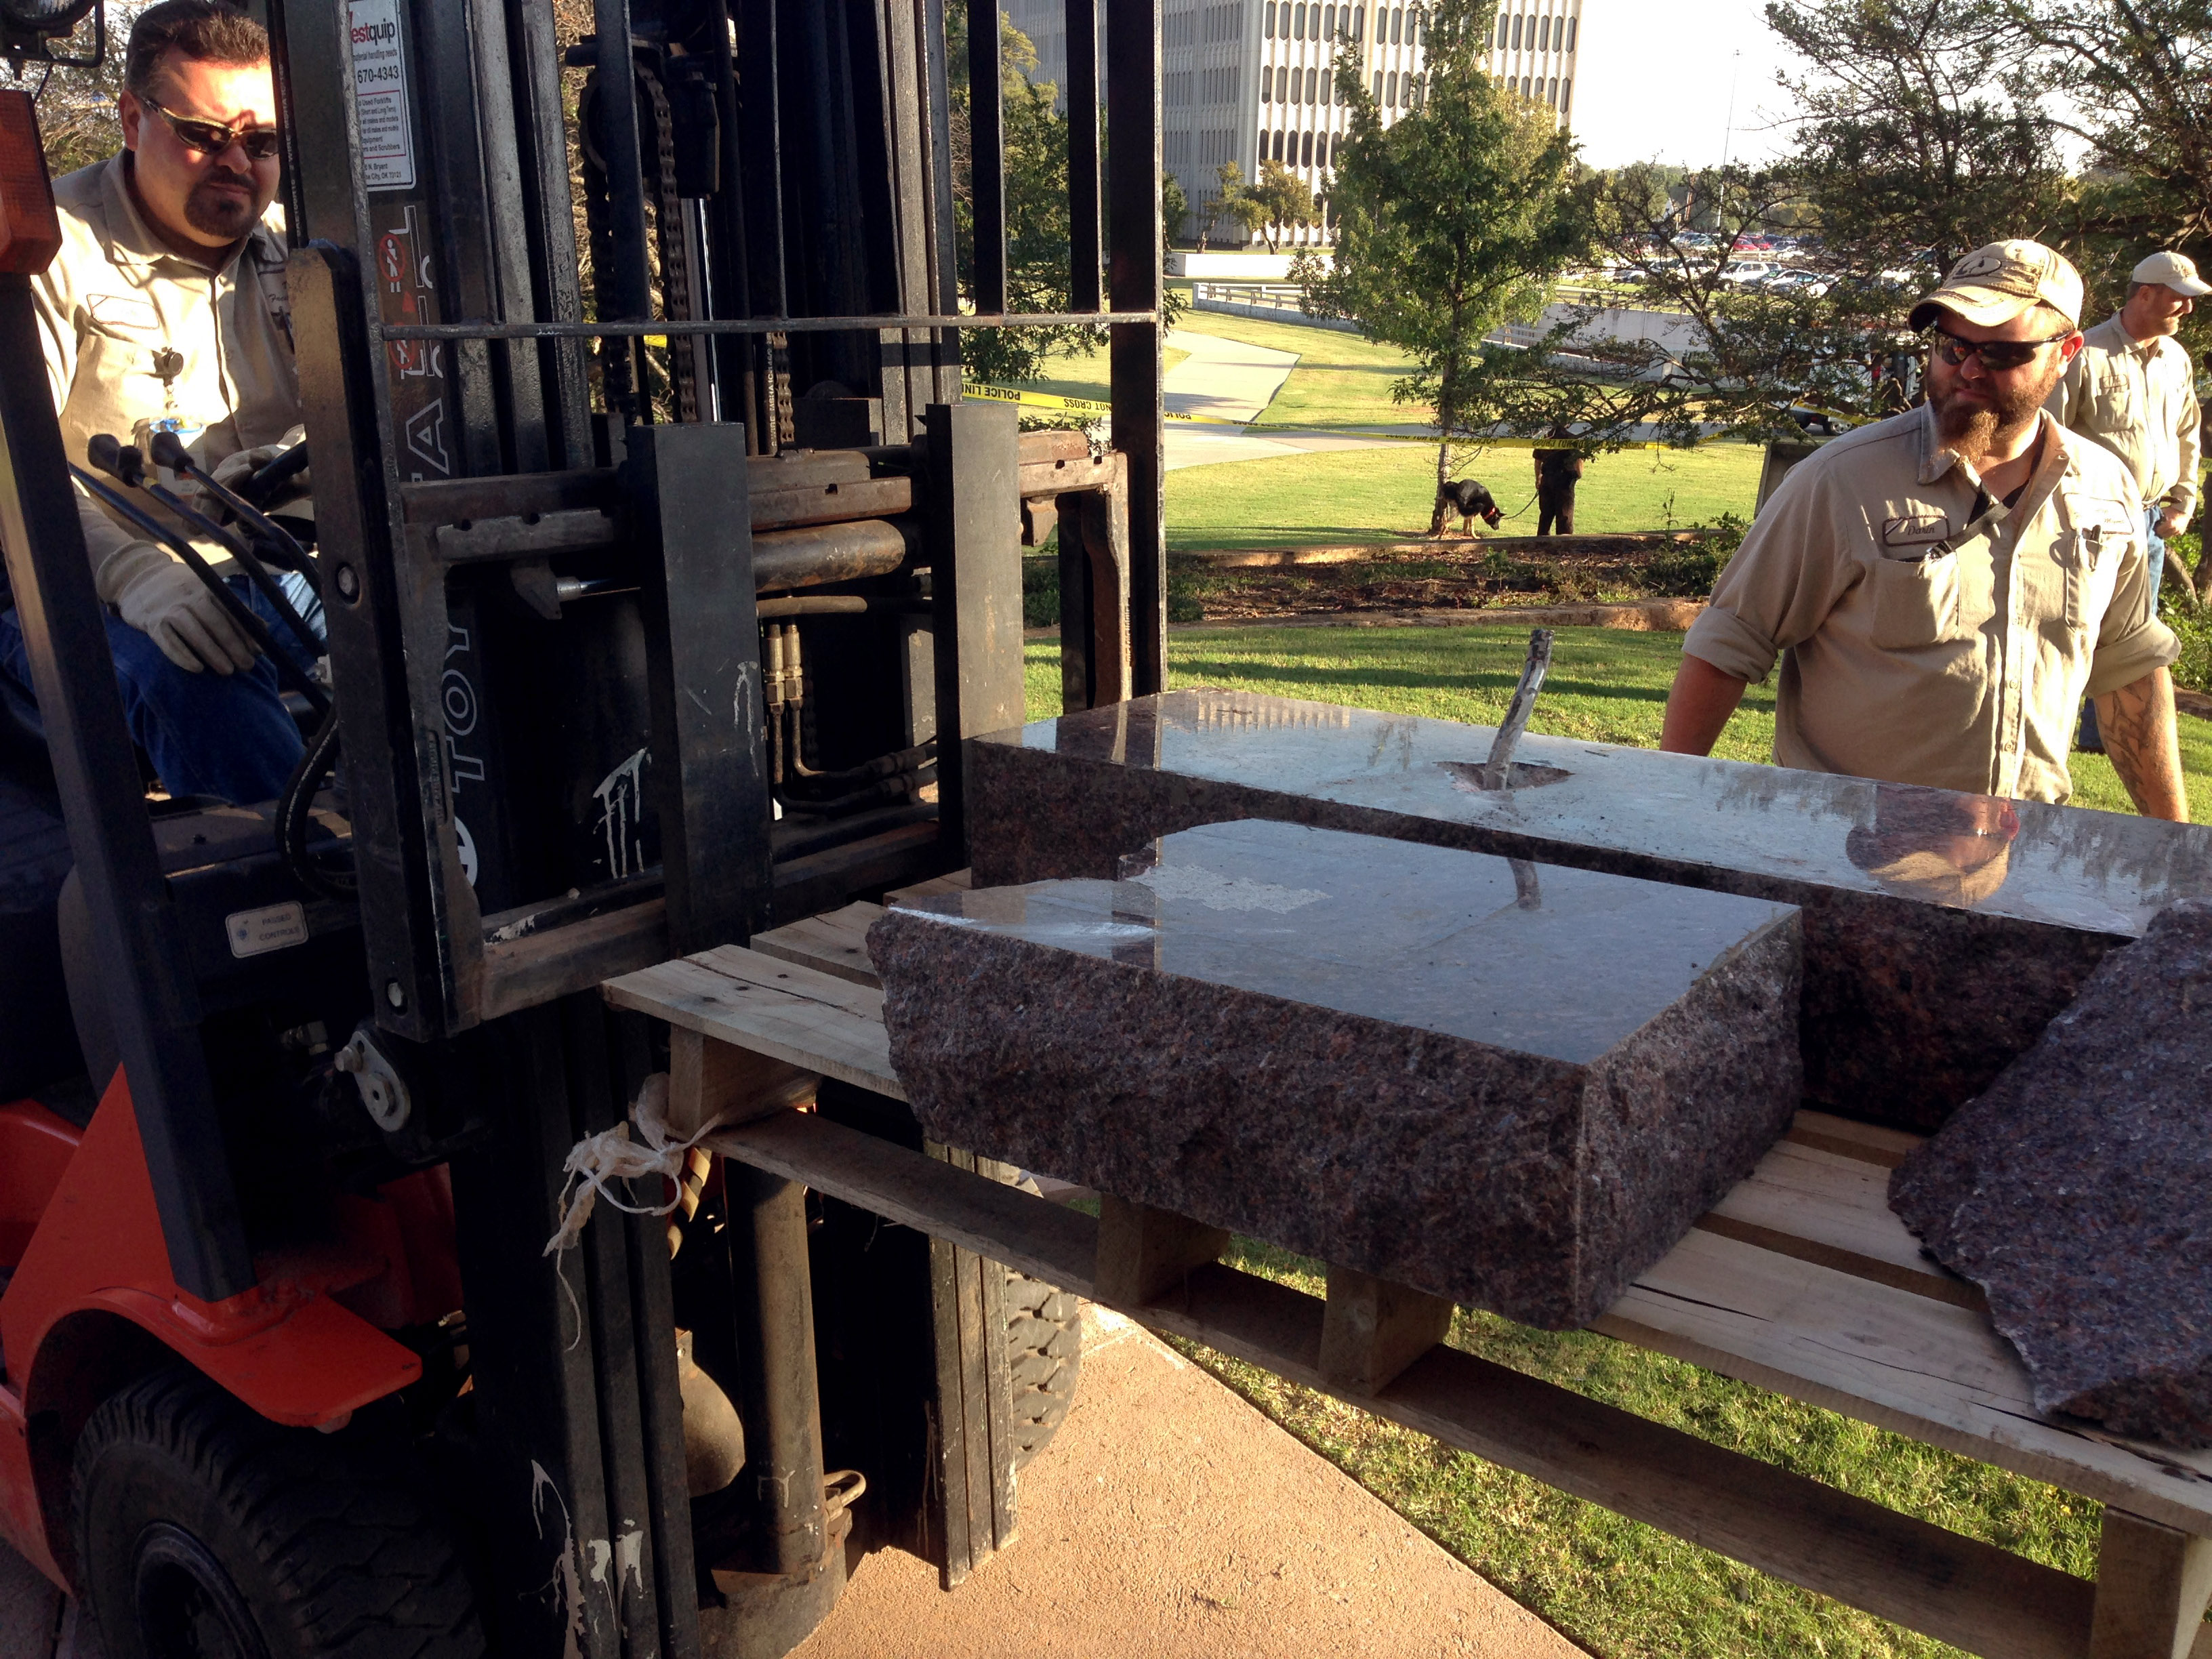 State workers for the Office of Management and Enterprise Services remove the damaged remains of a Ten Commandments monument from the Oklahoma State Capitol grounds on Oct. 24, 2014 in Oklahoma City.